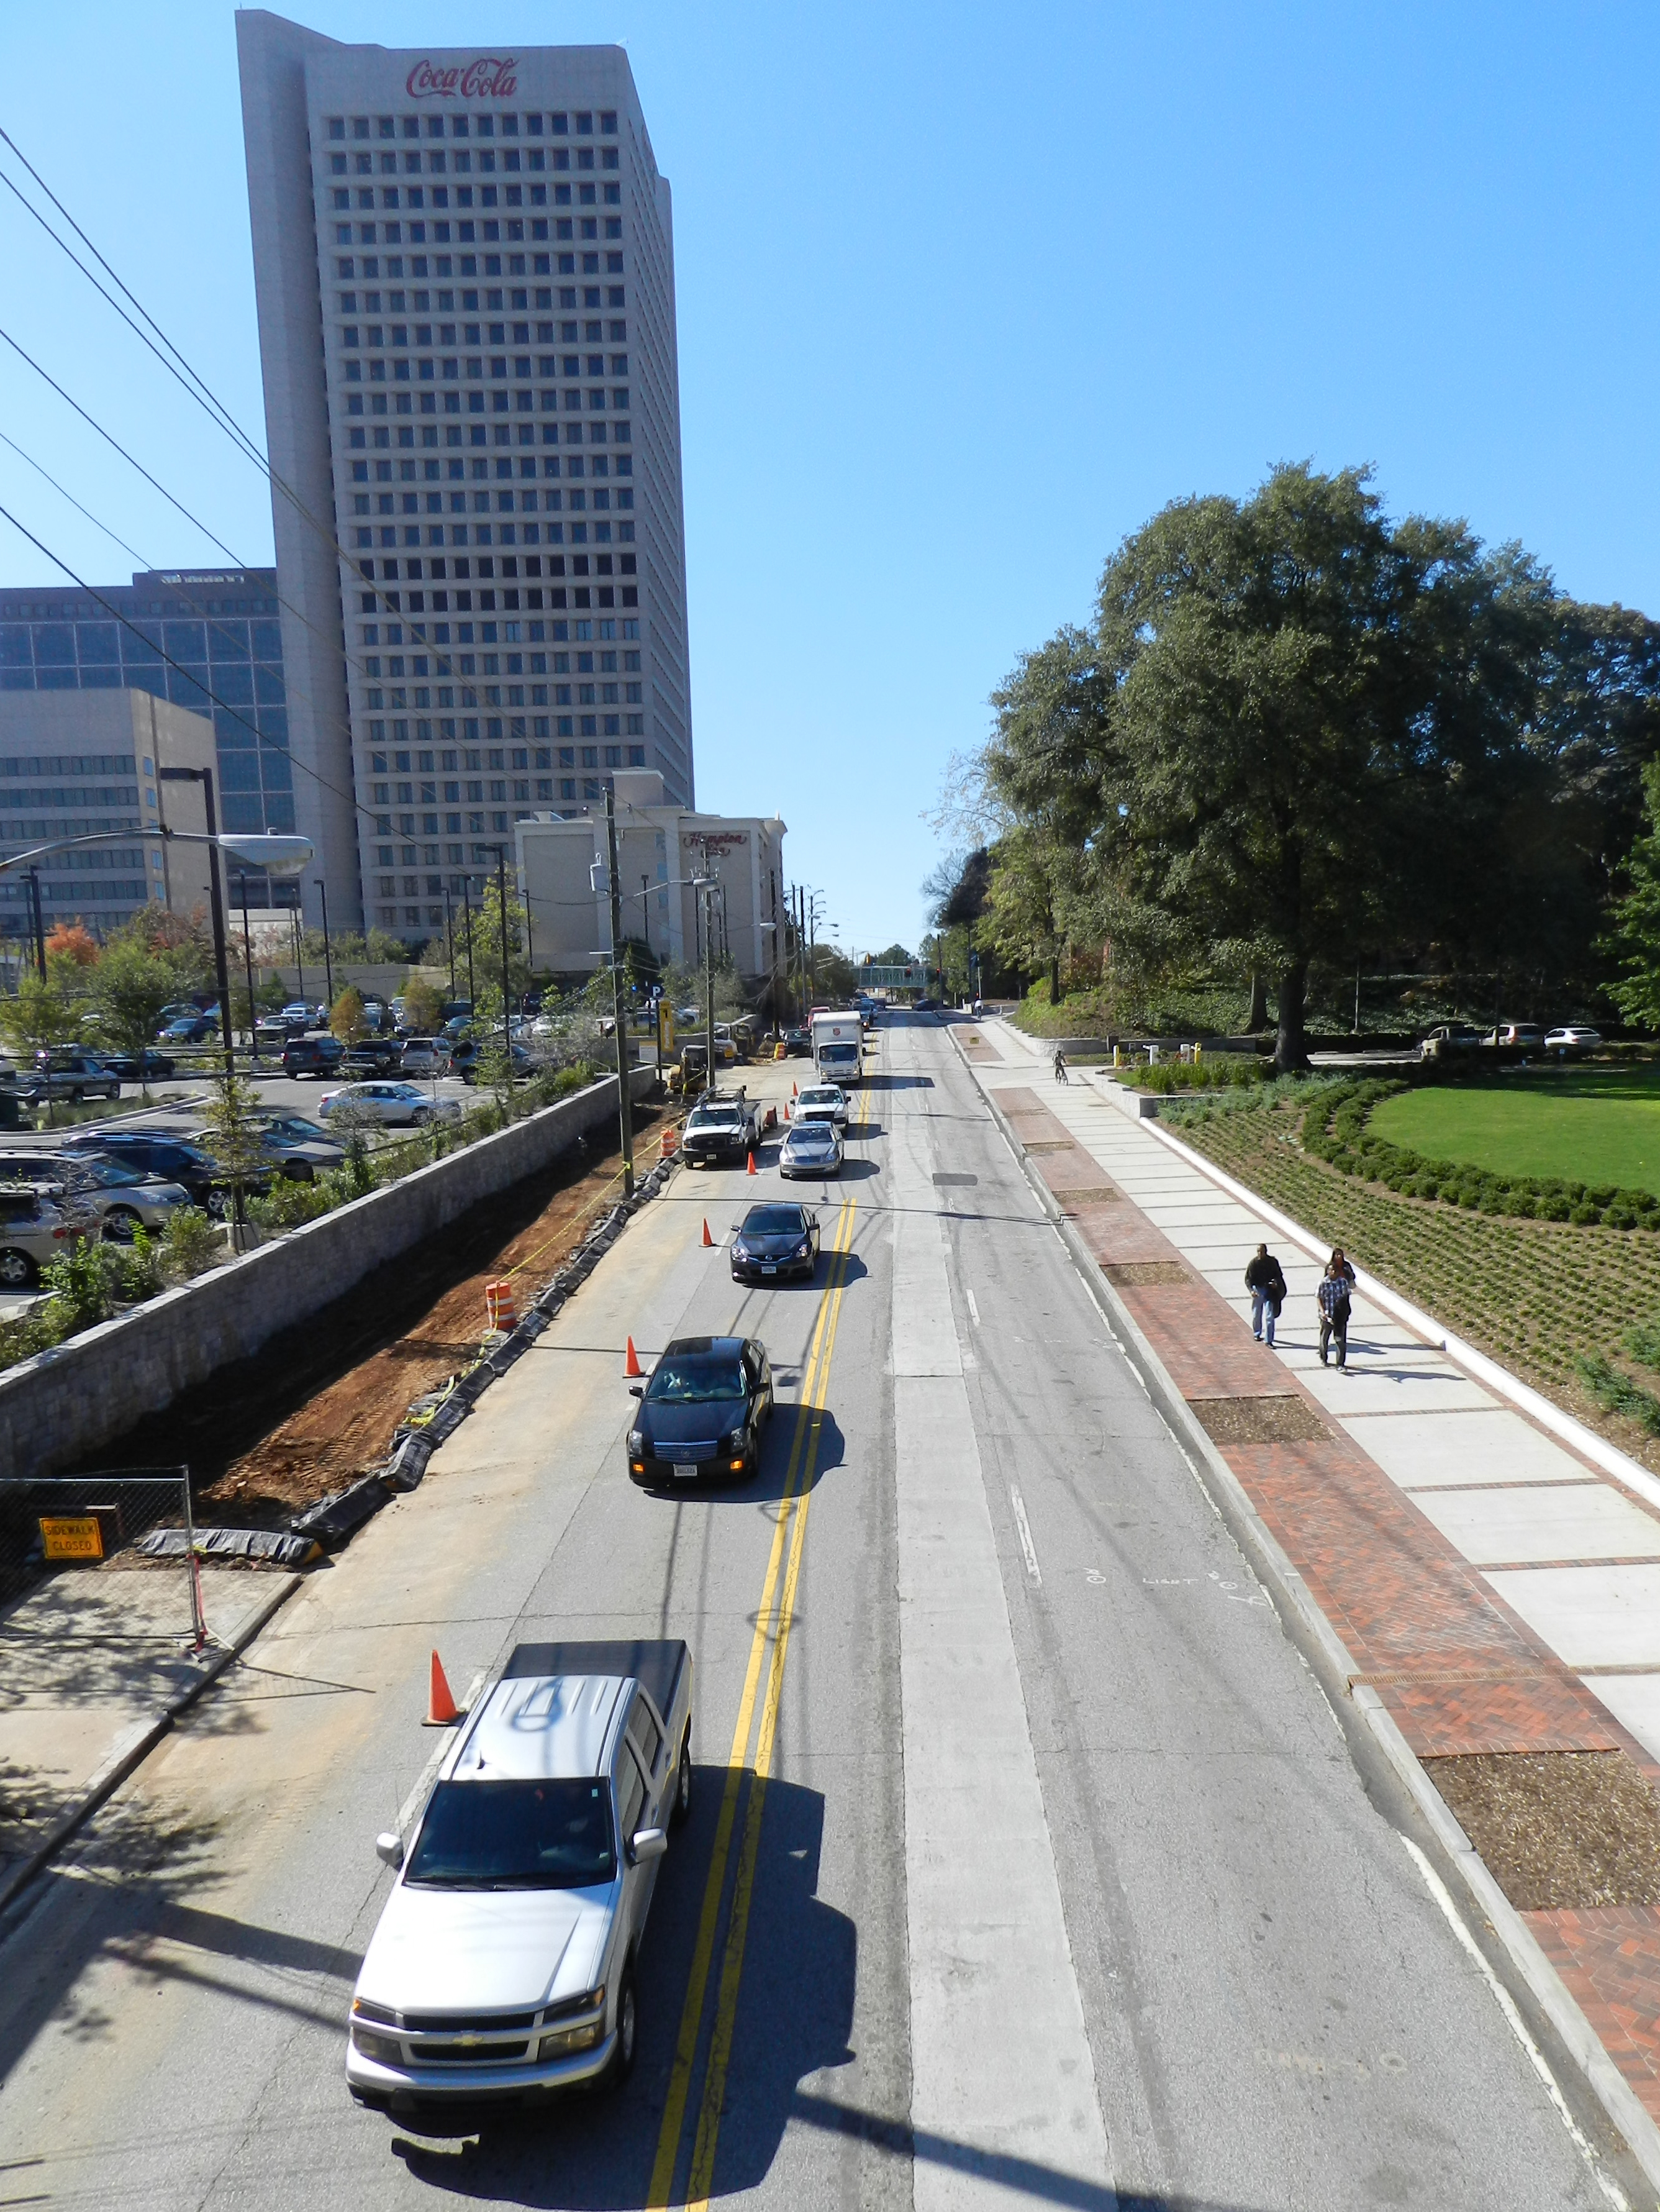 The south side of North Avenue (left) will soon resemble the recently renovated north side of the road (right). All construction on North Avenue is anticipated to be complete by February 2012.